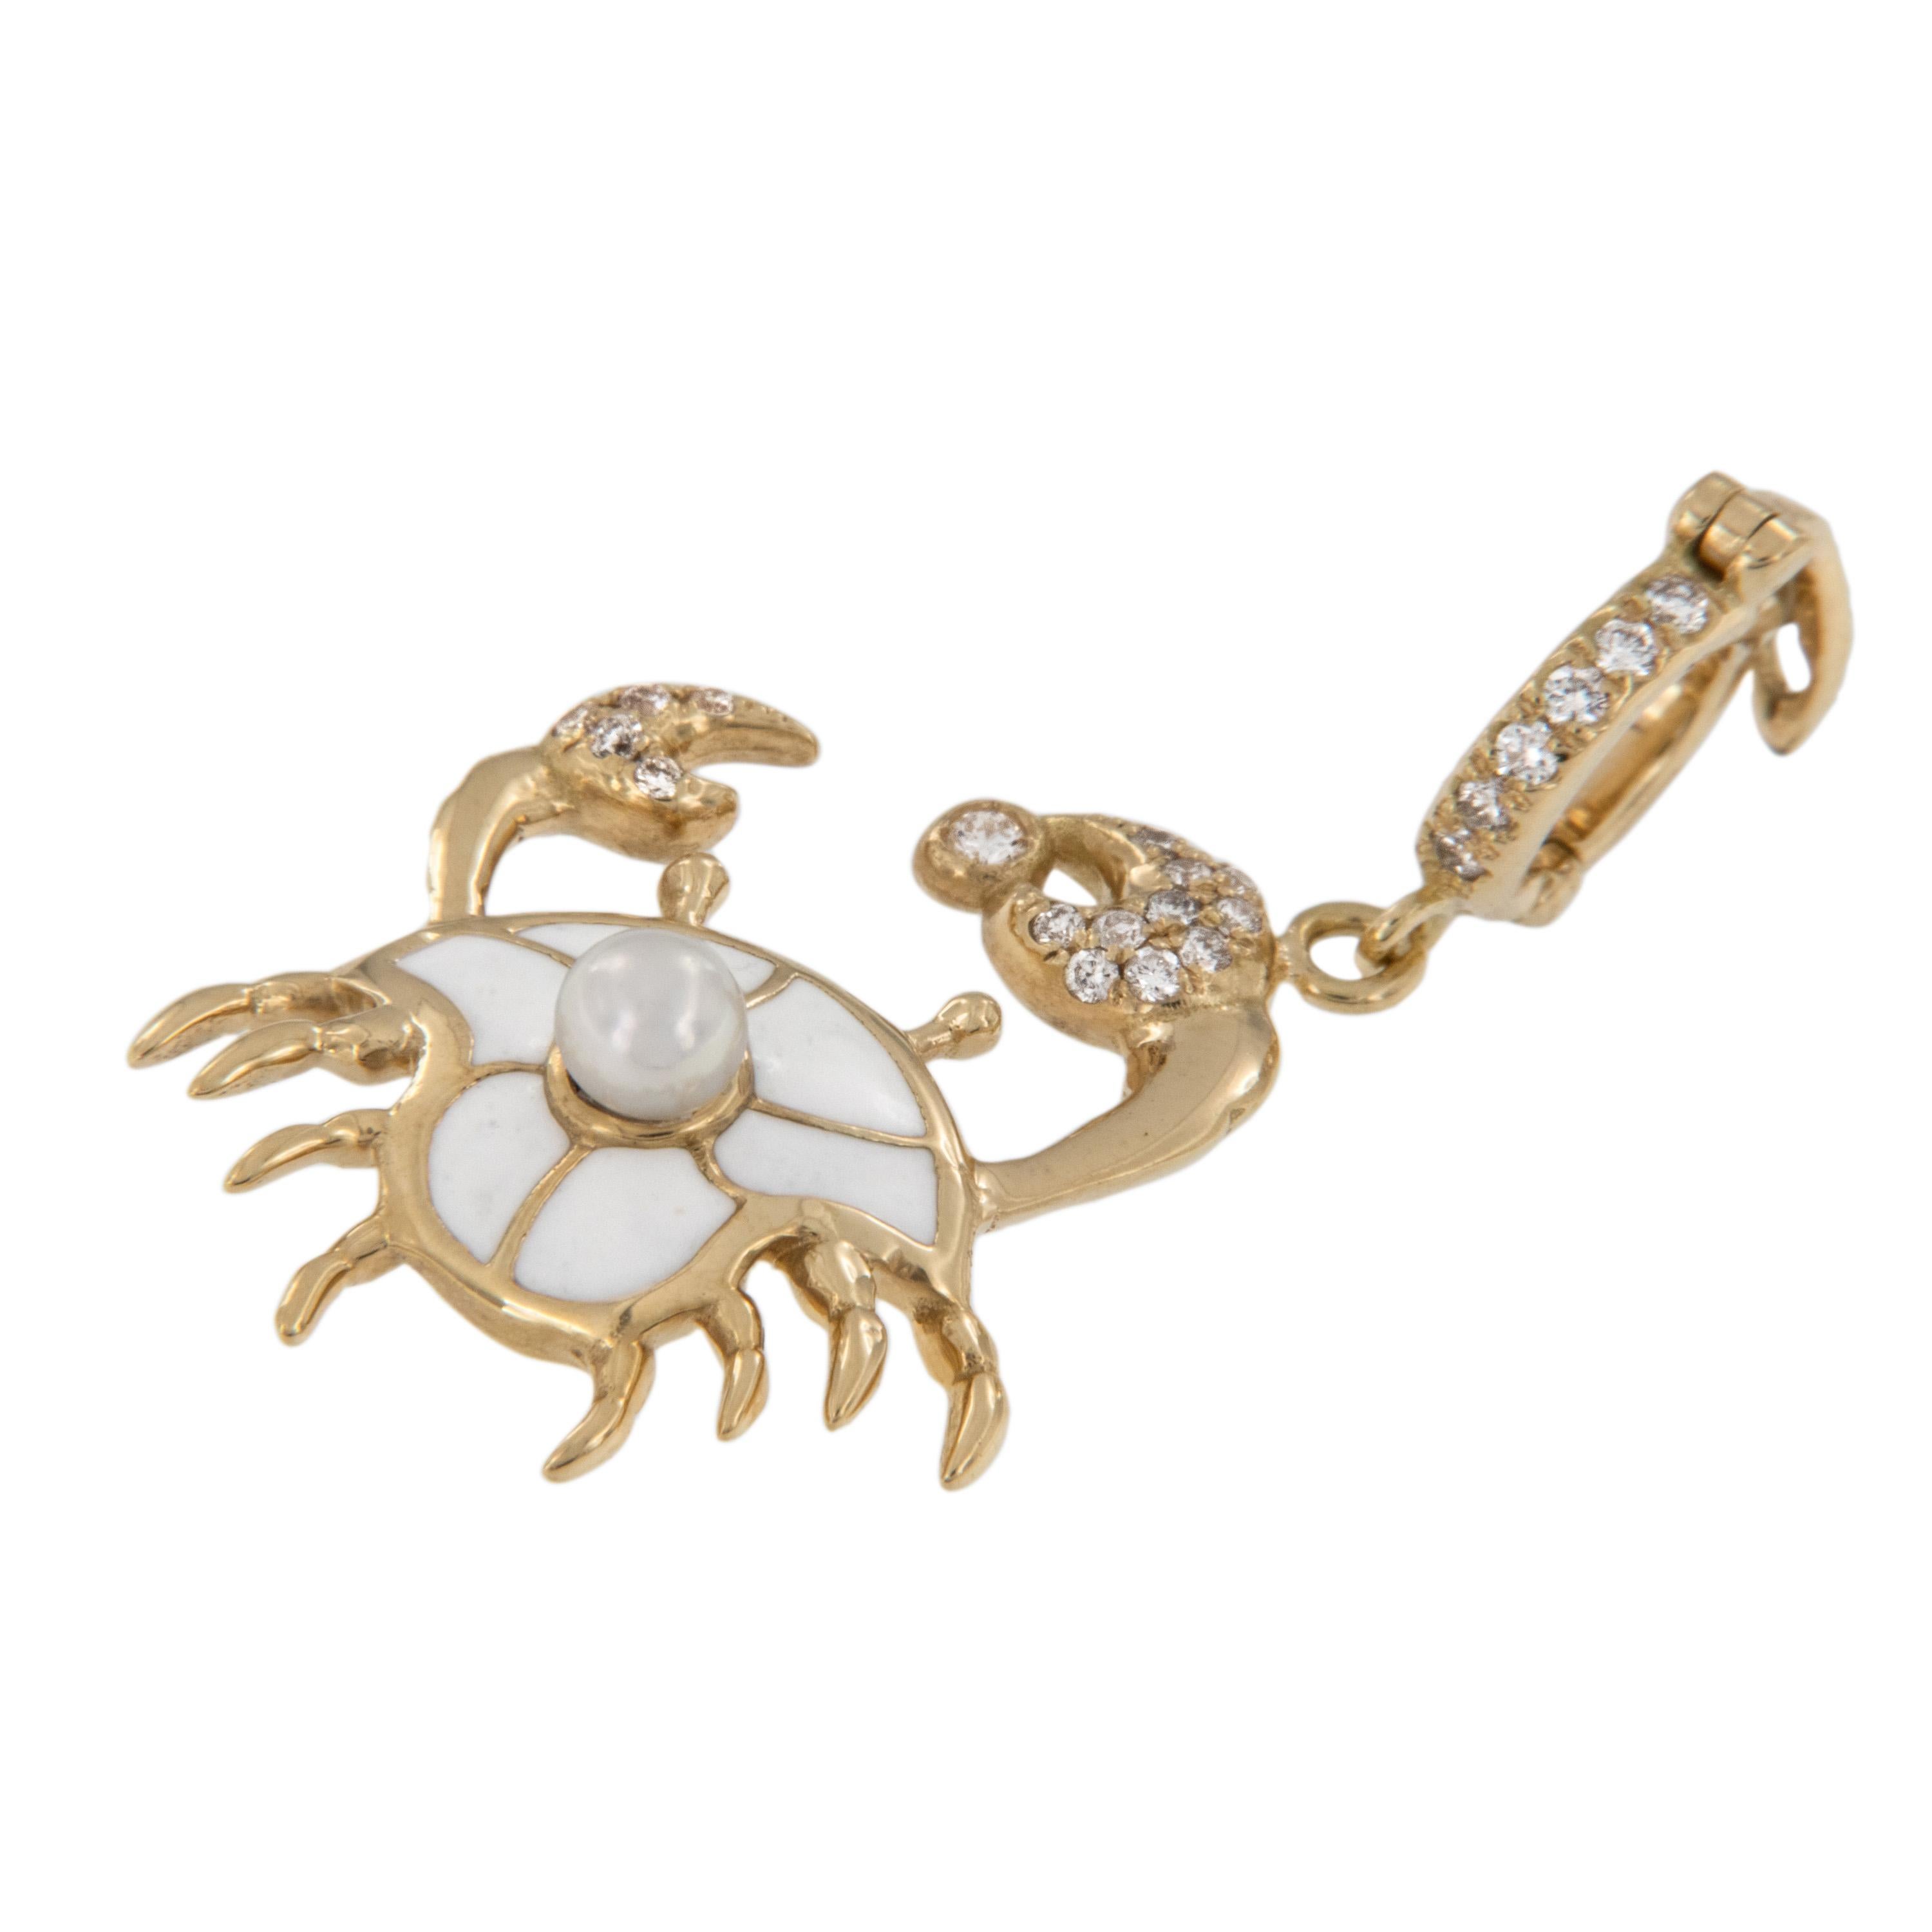 Crafted in rich 18 karat yellow gold this adorable crab with white enamel, pearl back and 0.12 Cttw white diamond encrusted claws and bail which is hinged making it easy to wear with your favorite chain or bracelet, or check out our extensive